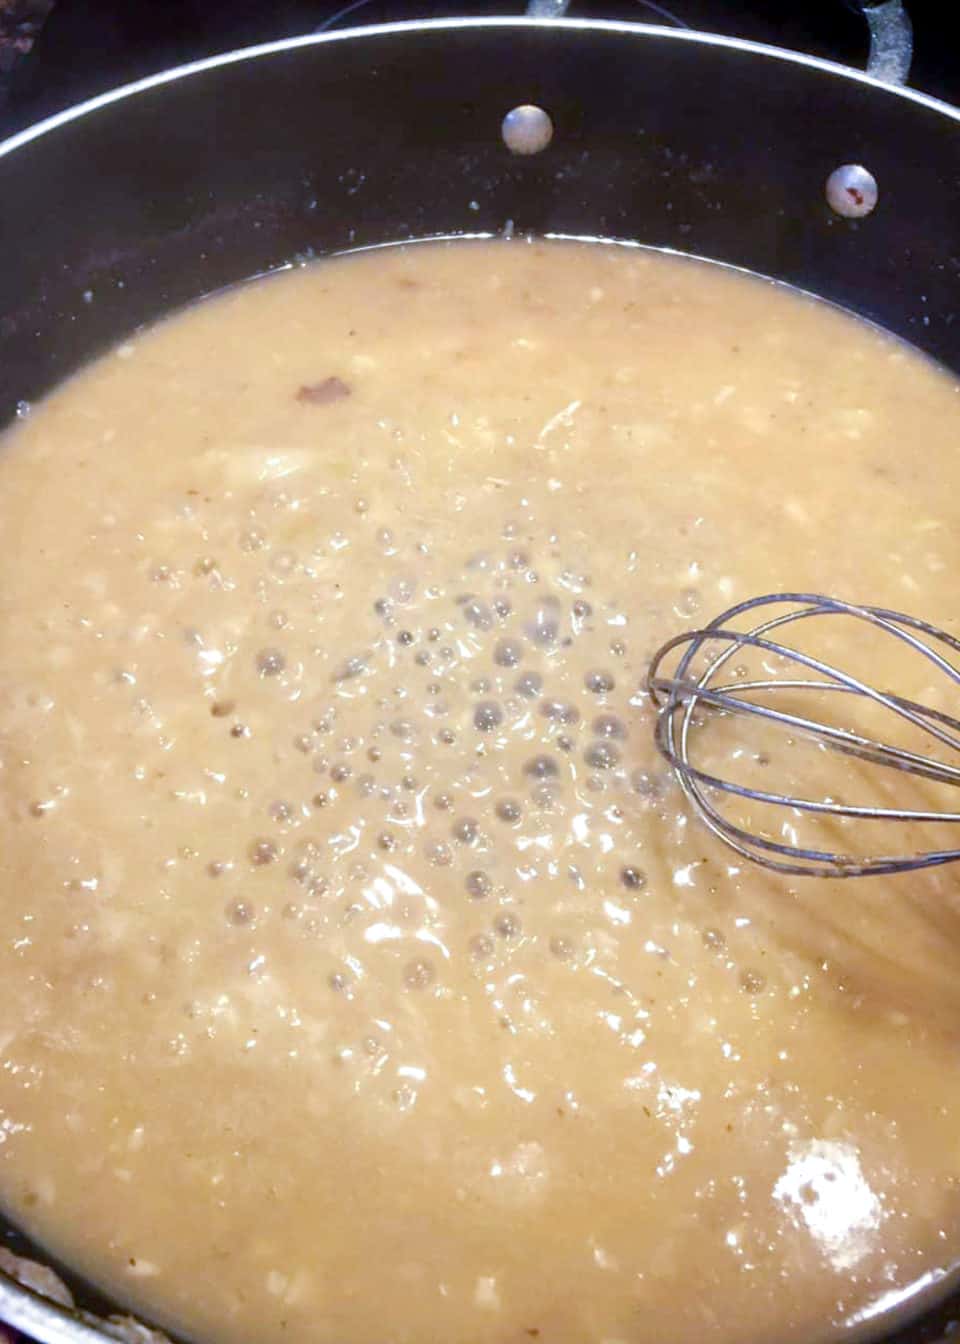 Bubbling sauce and a whisk in a skillet.